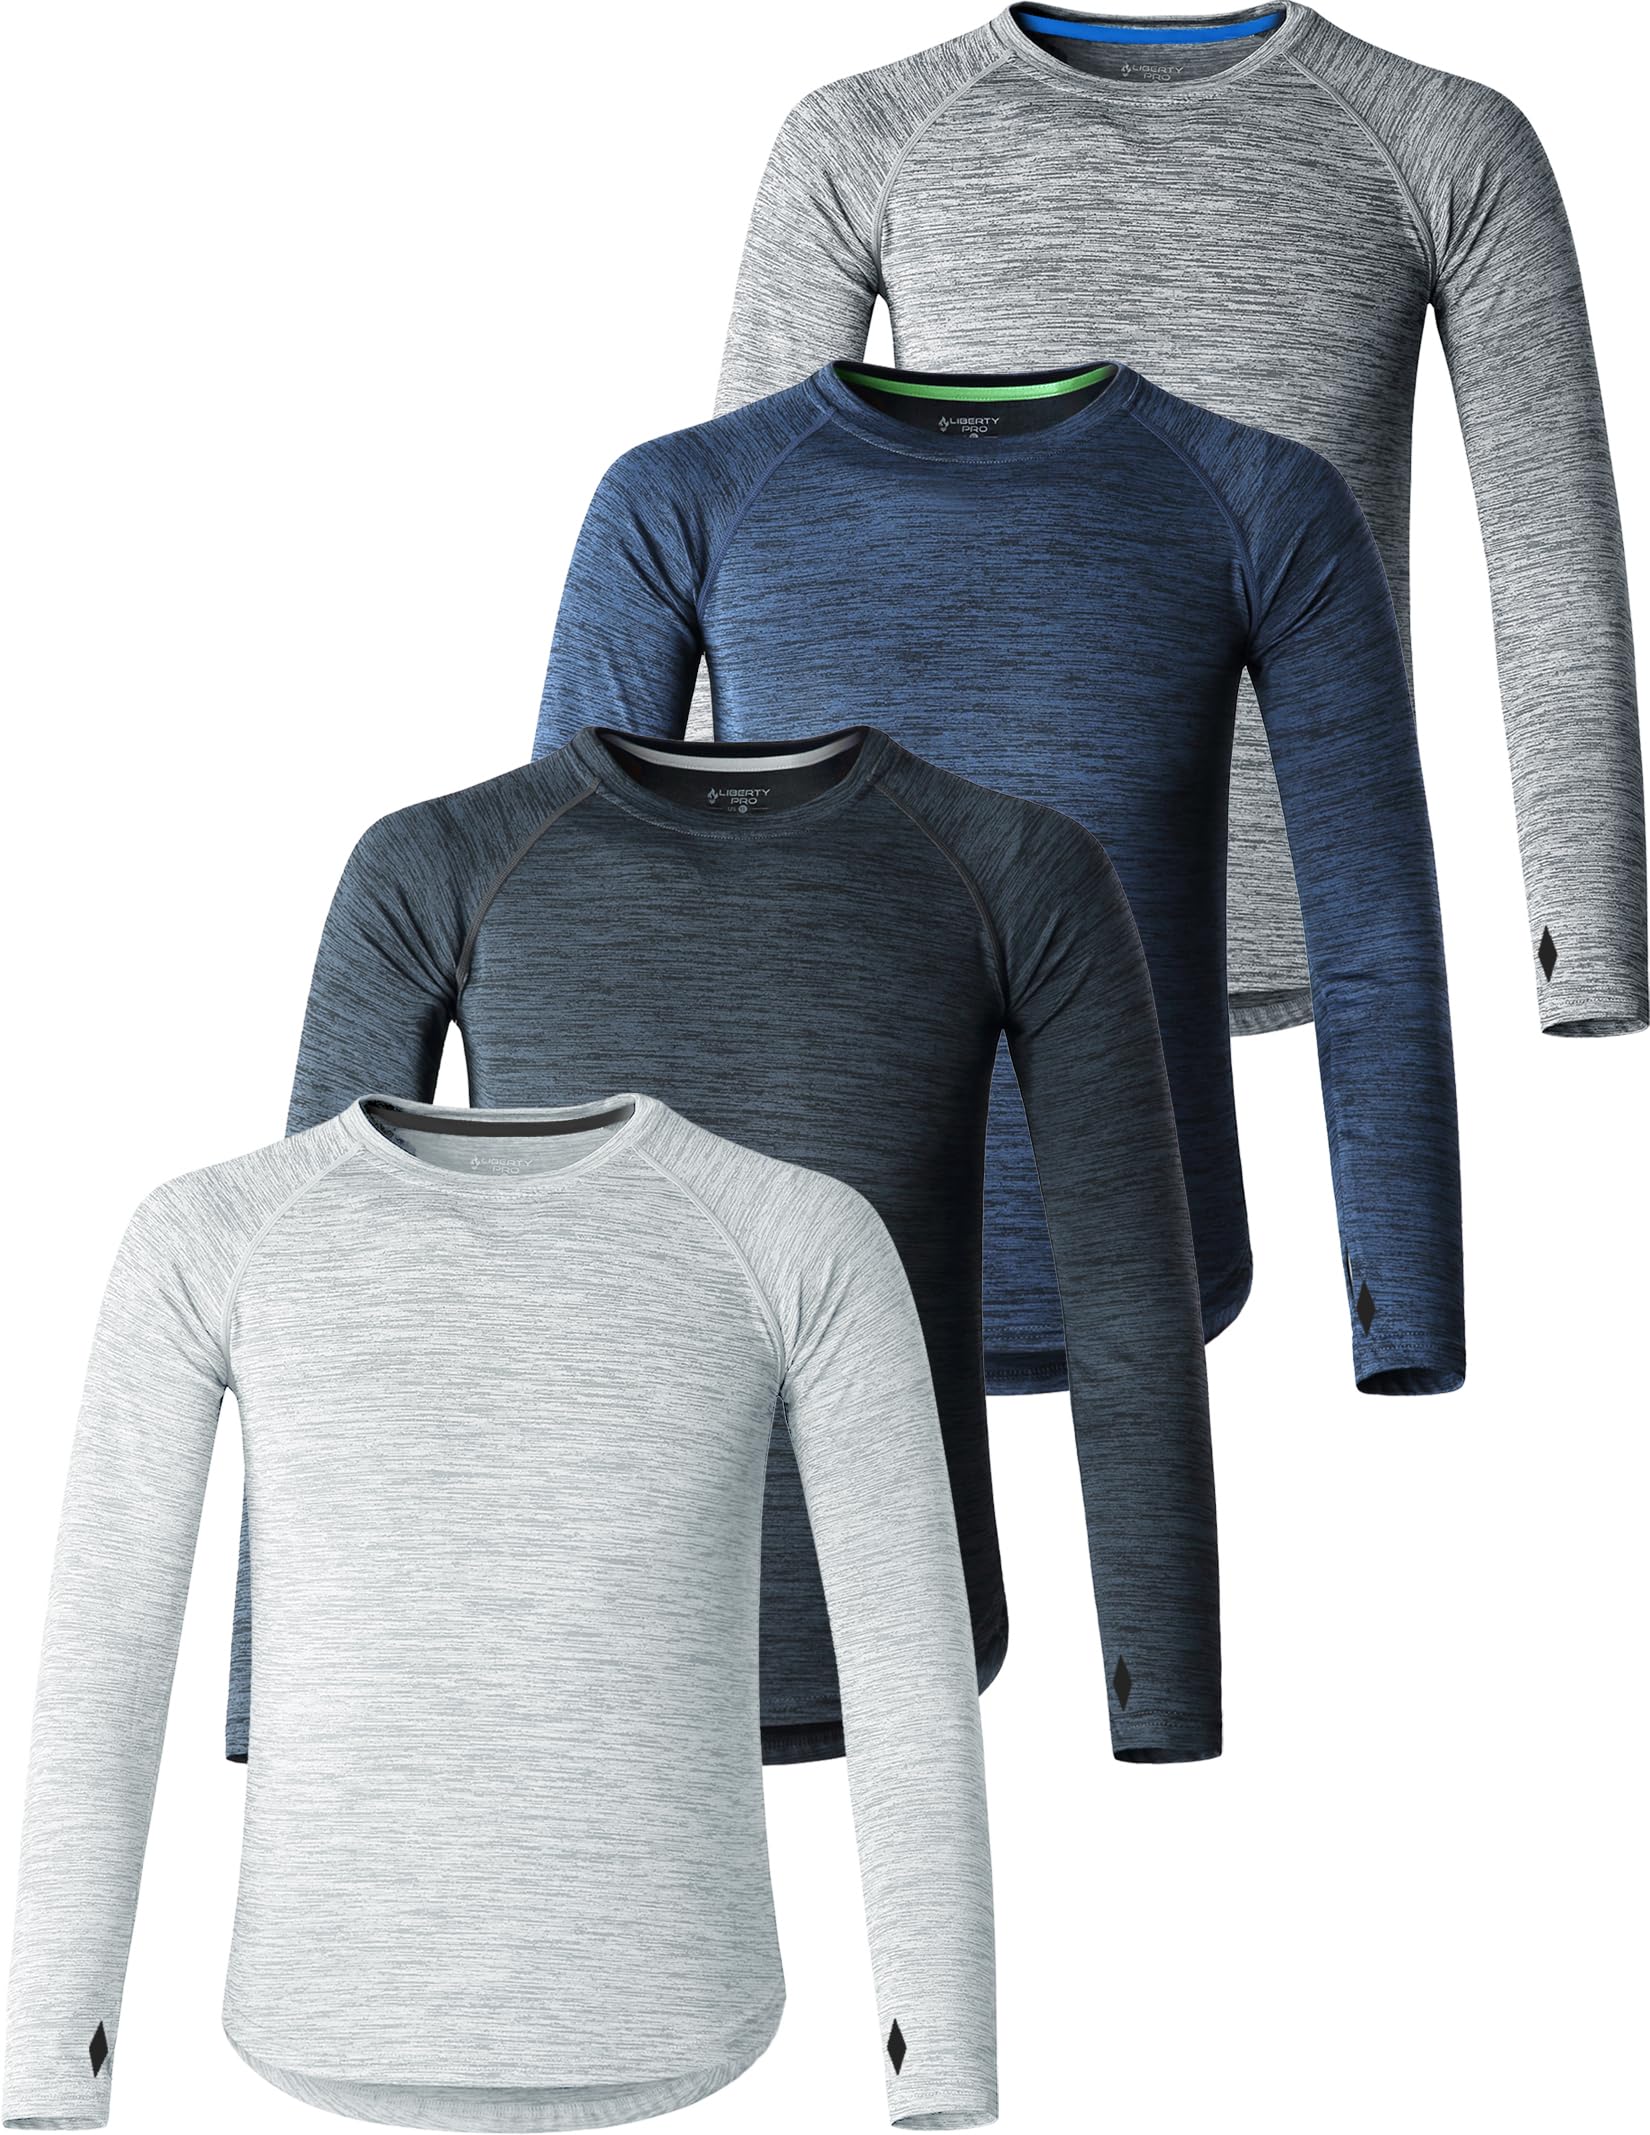 4 Pack: Youth Boys Long Sleeve Shirts Dry Fit Athletic Clothes for Teens, Kids Active Performance Tshirts with Thumb Holes